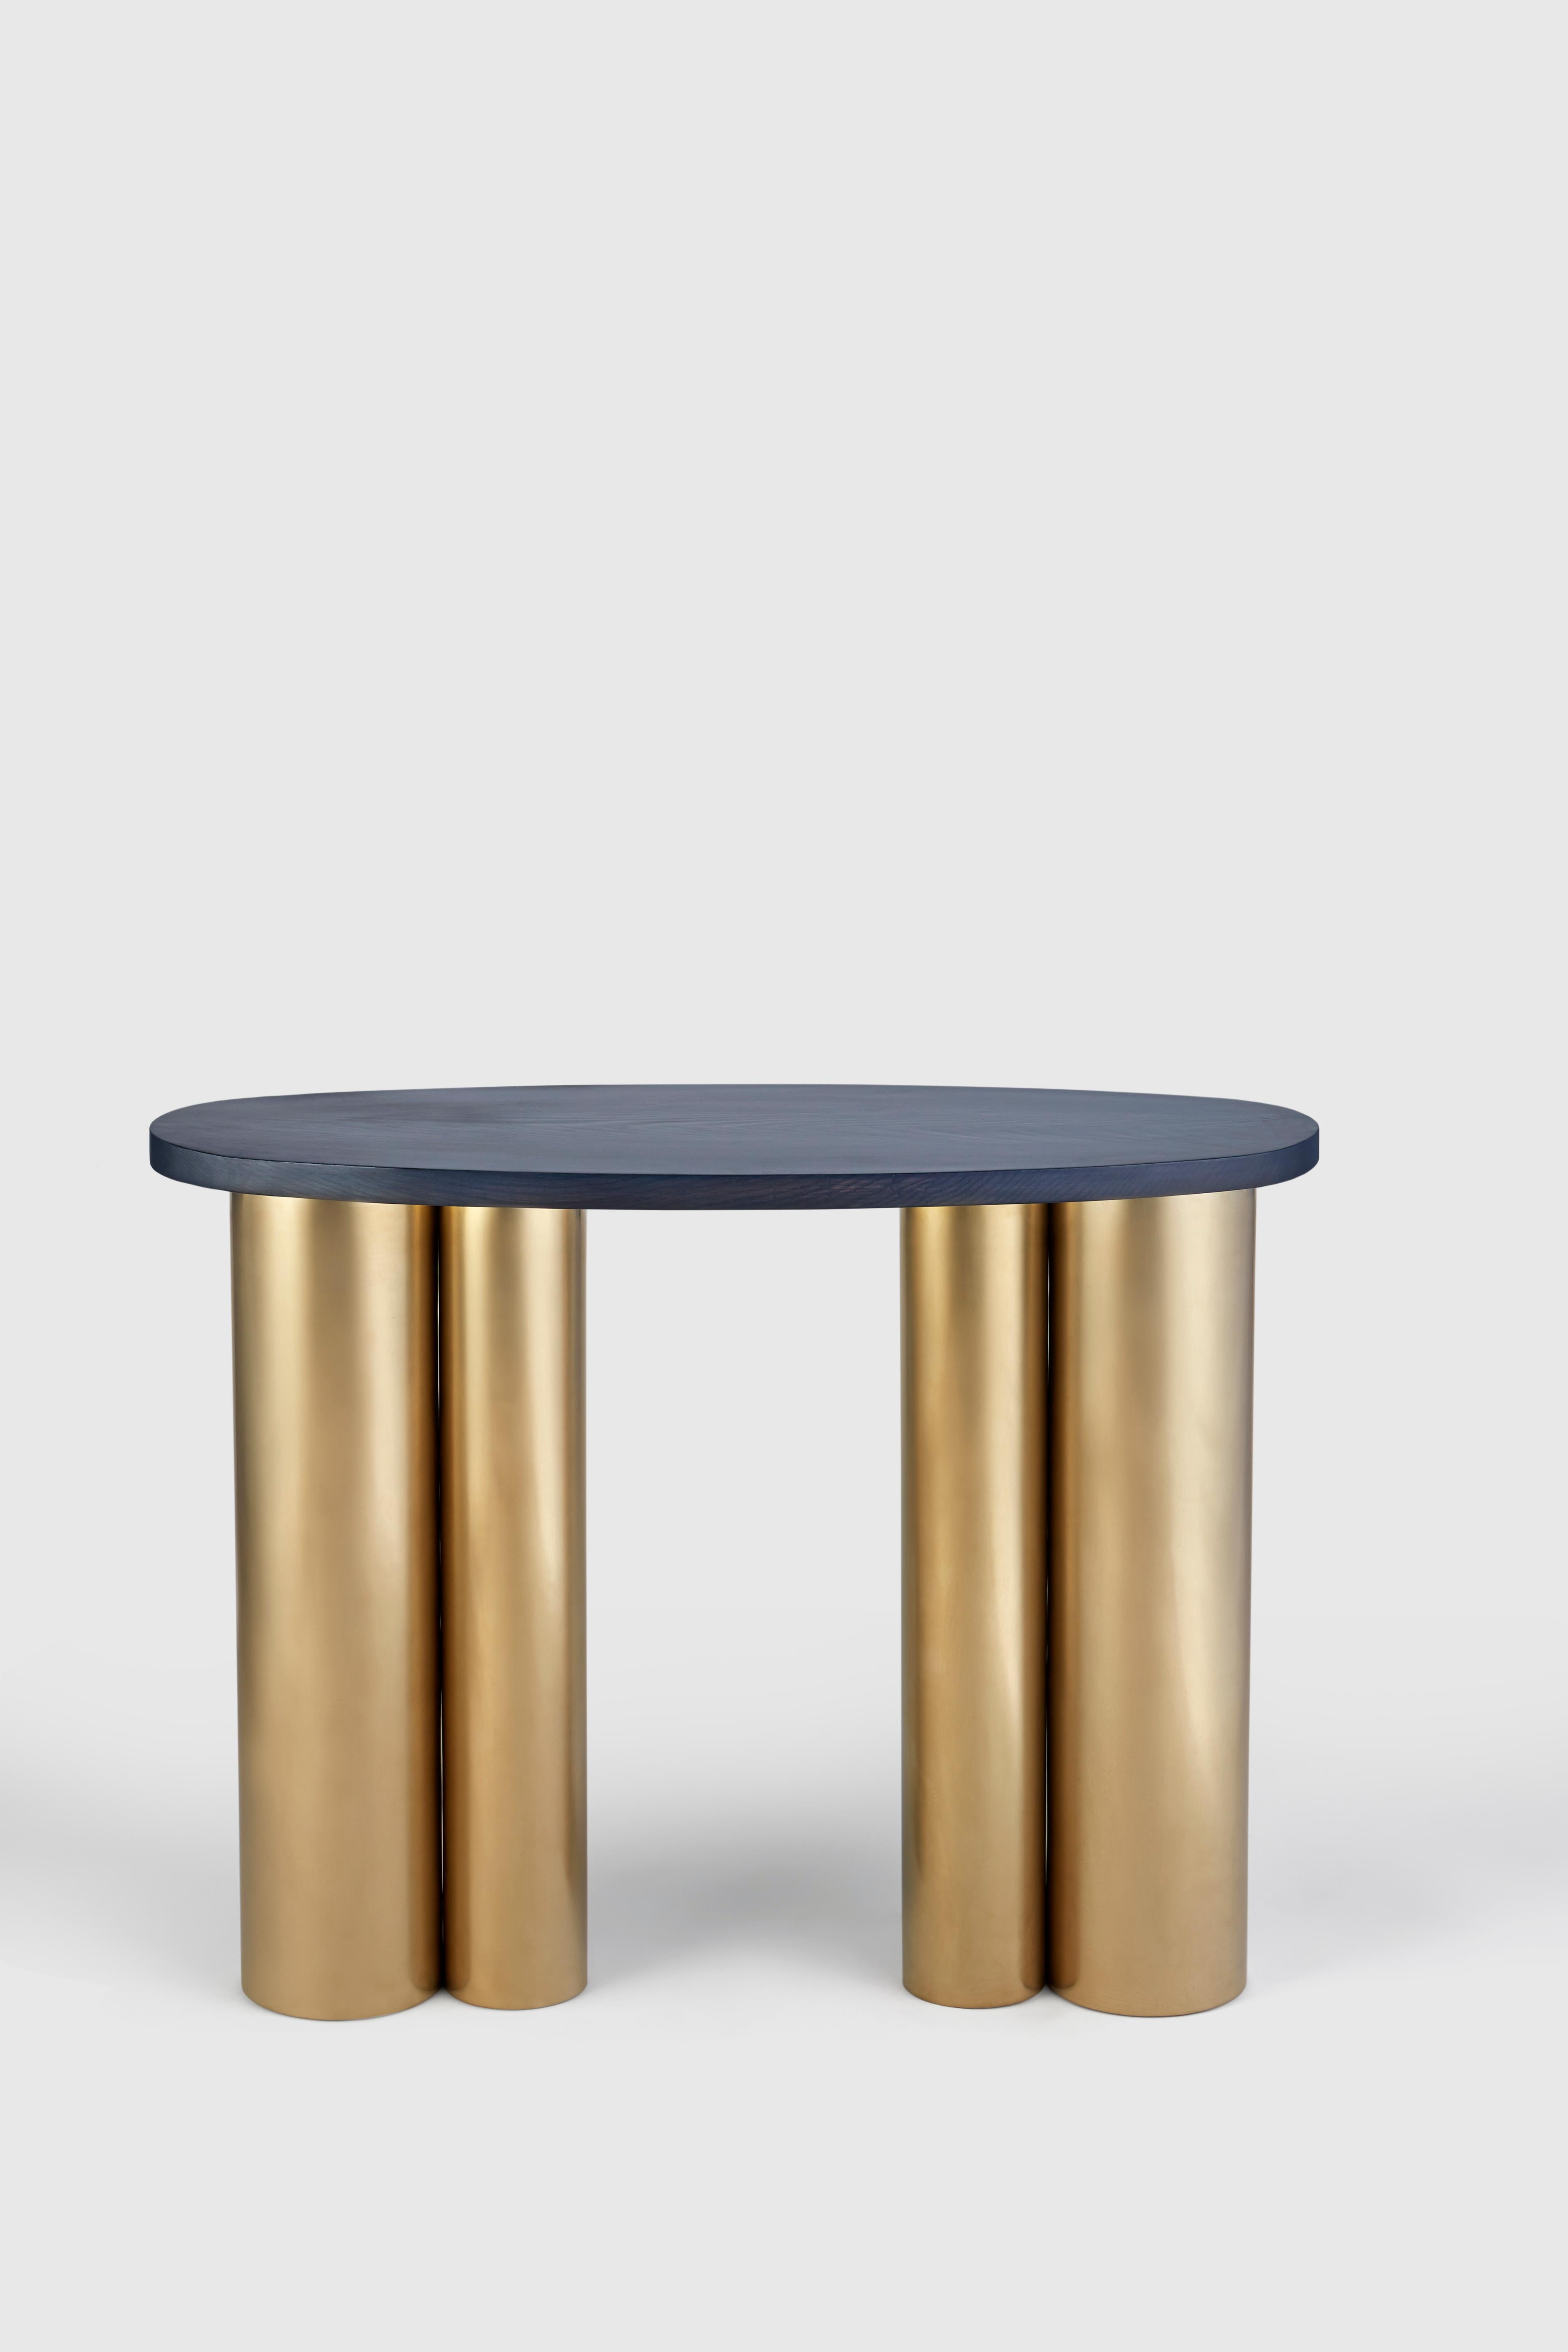 Indian Unique Bloom Table Gold by Hatsu